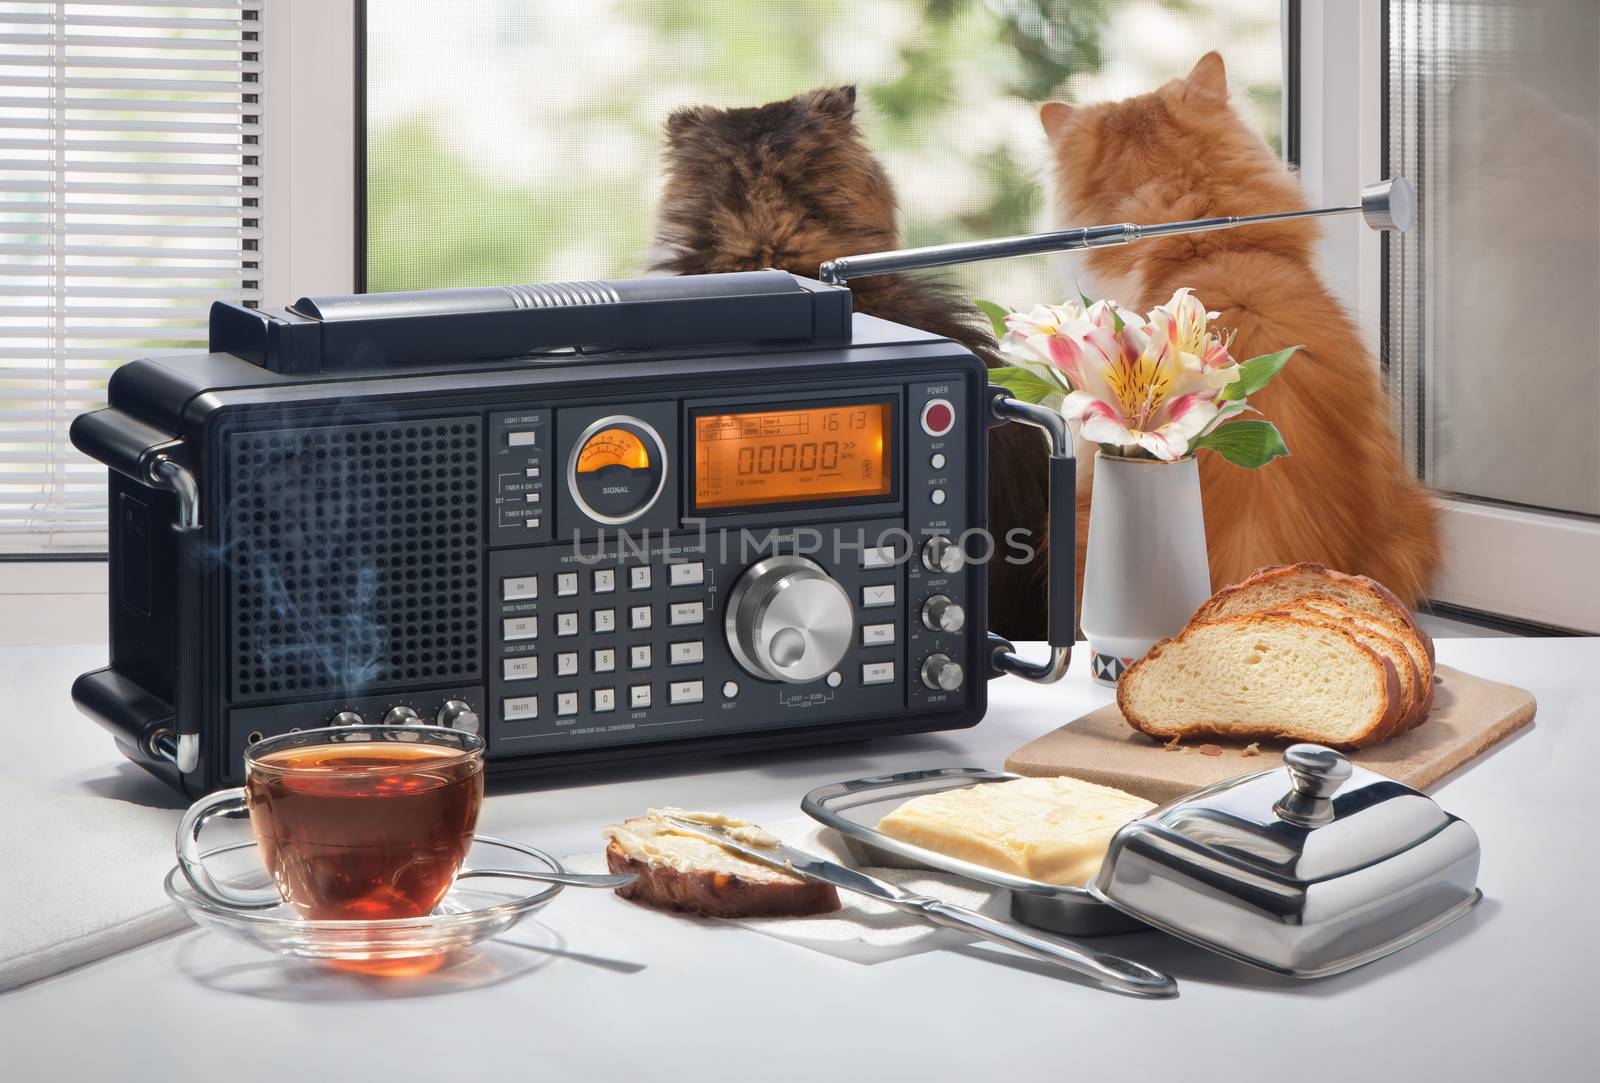 Hot tea, bread and oil on a table with the radio receiver against an open window with cats